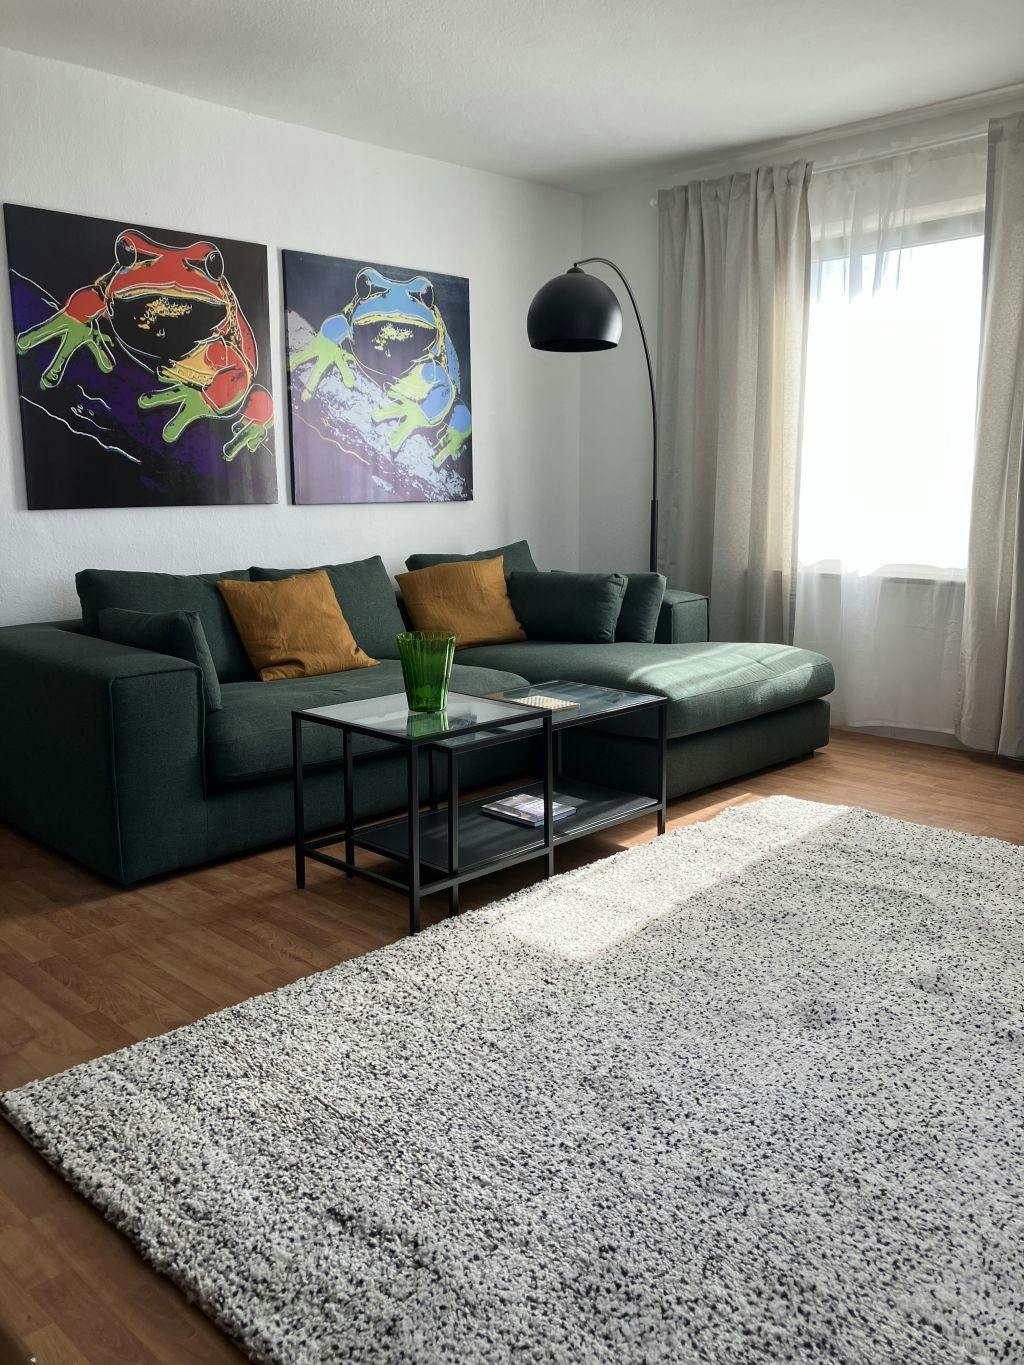 Service Apartments in Wittlich - Furnished temporary accommodation - boarding house - long-stay apartments